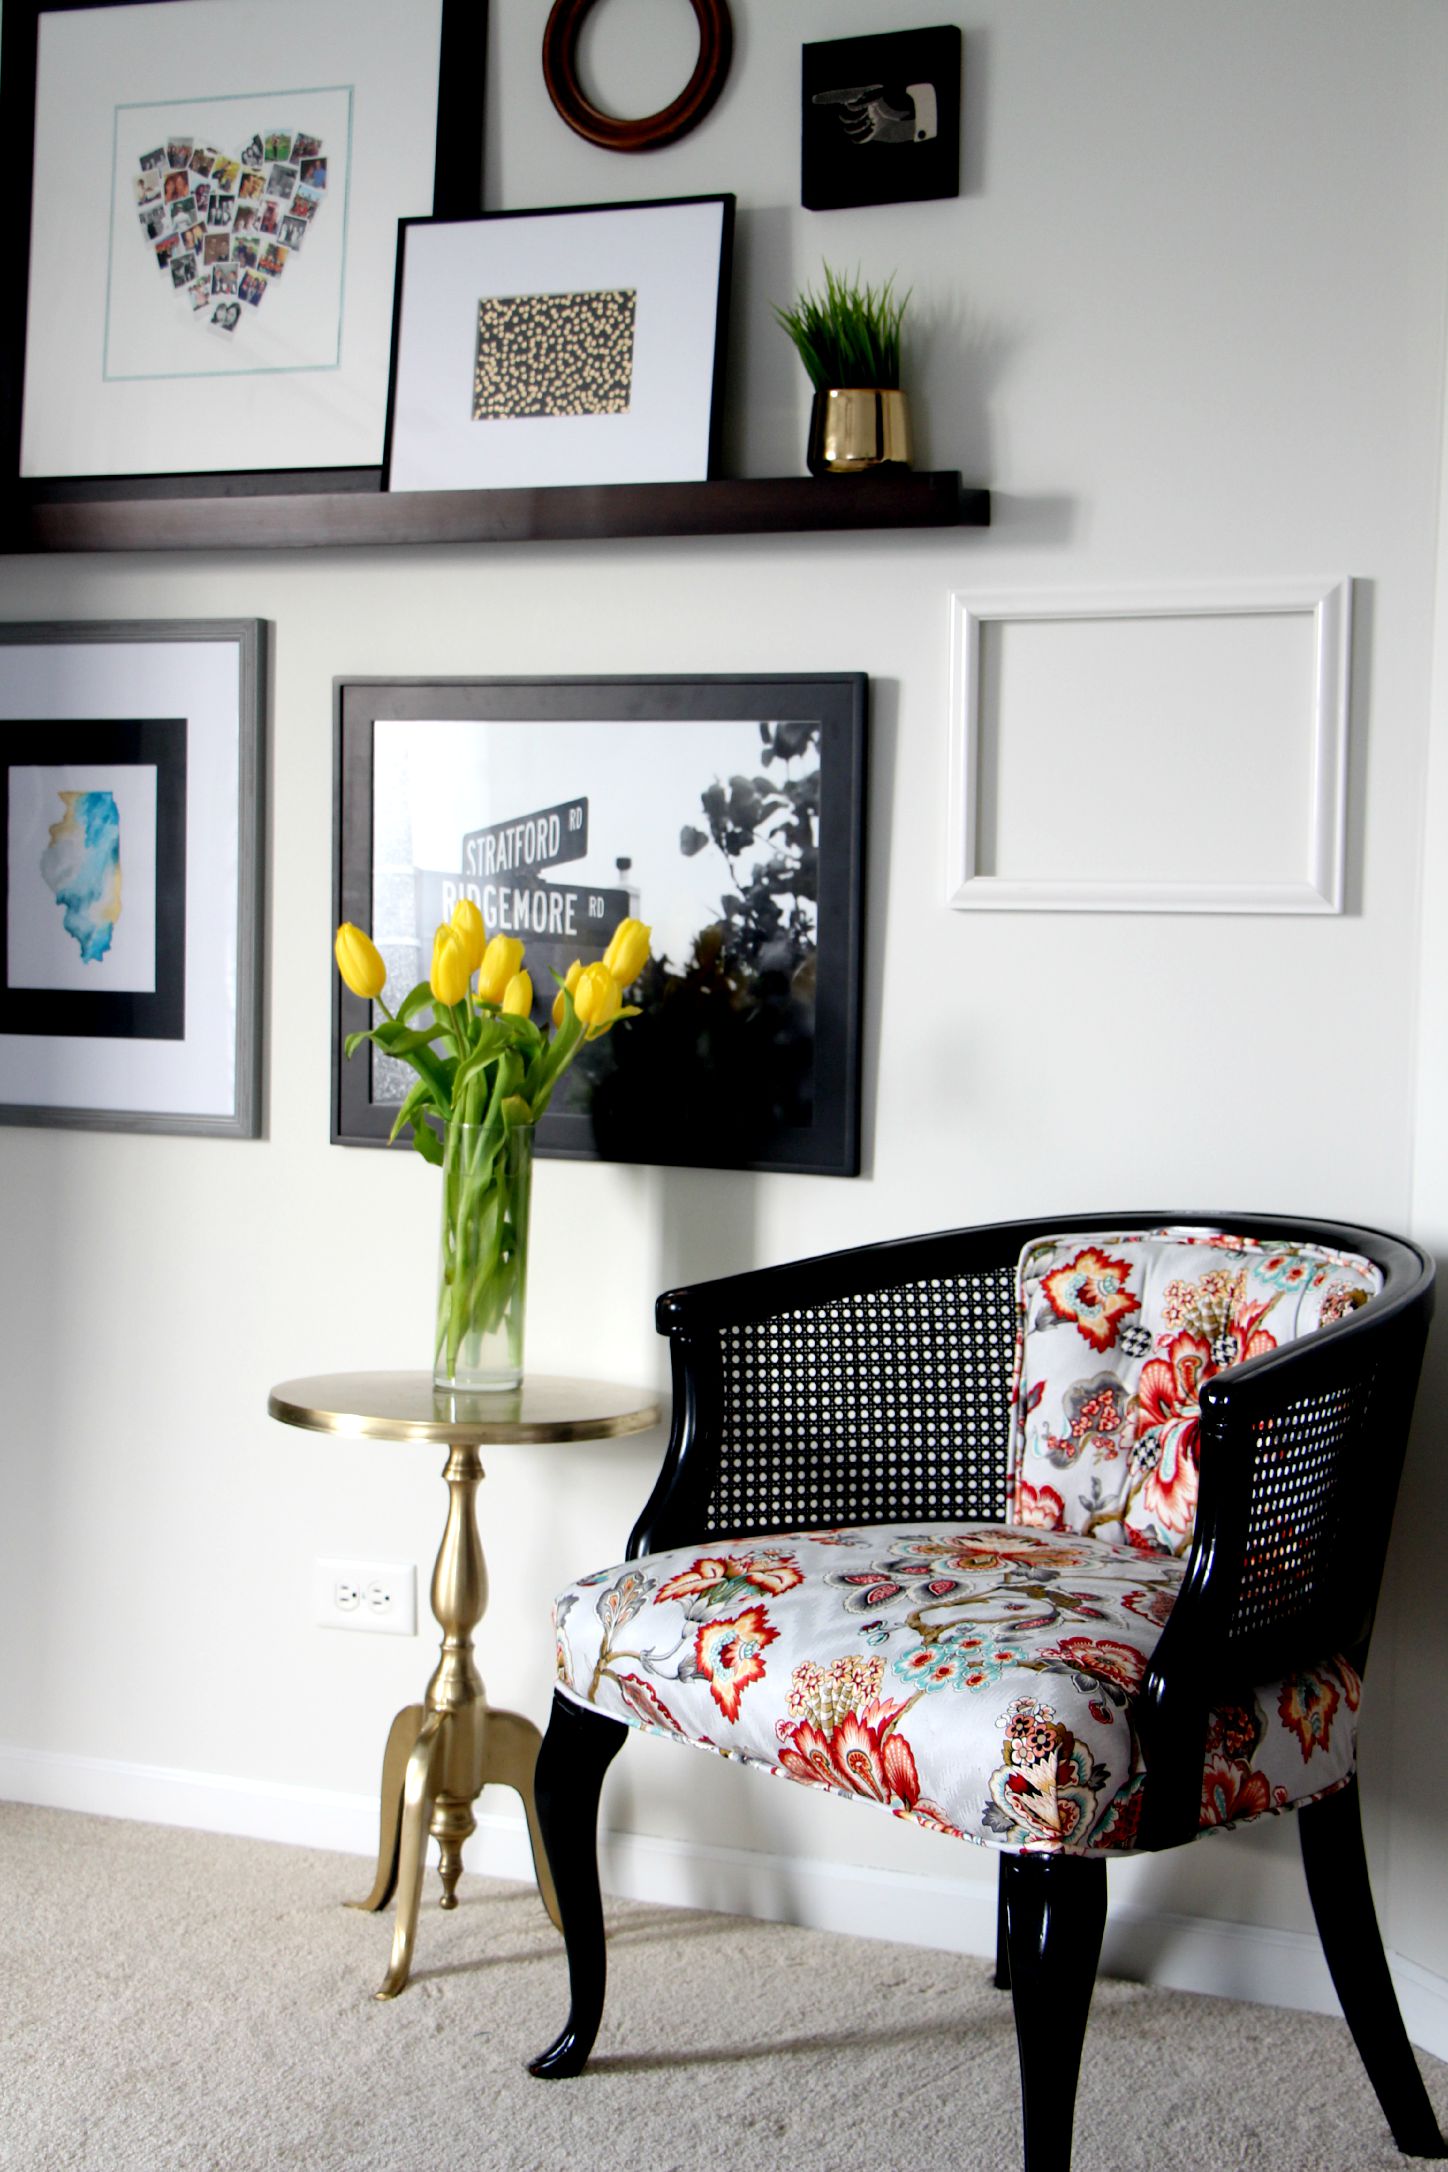 guestroom revamp - gallery wall - picture ledge - gold foil journal turned art - reupholstered cane chair - This is our Bliss